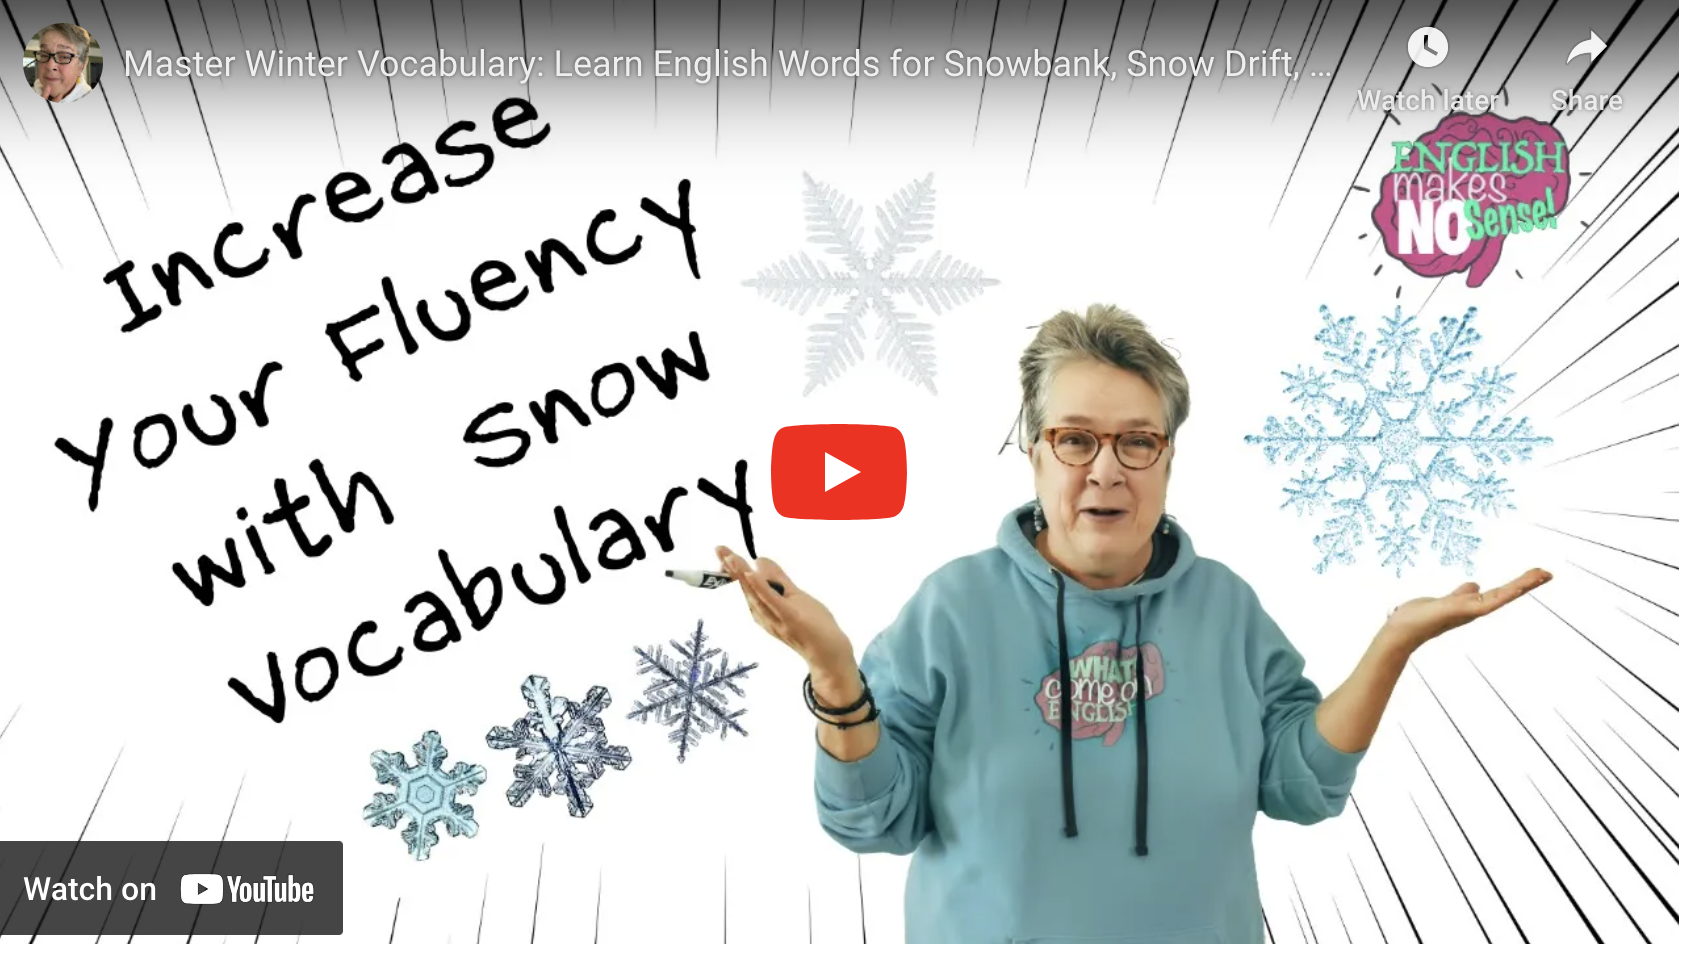 Increase your fluency with snow vocabulary